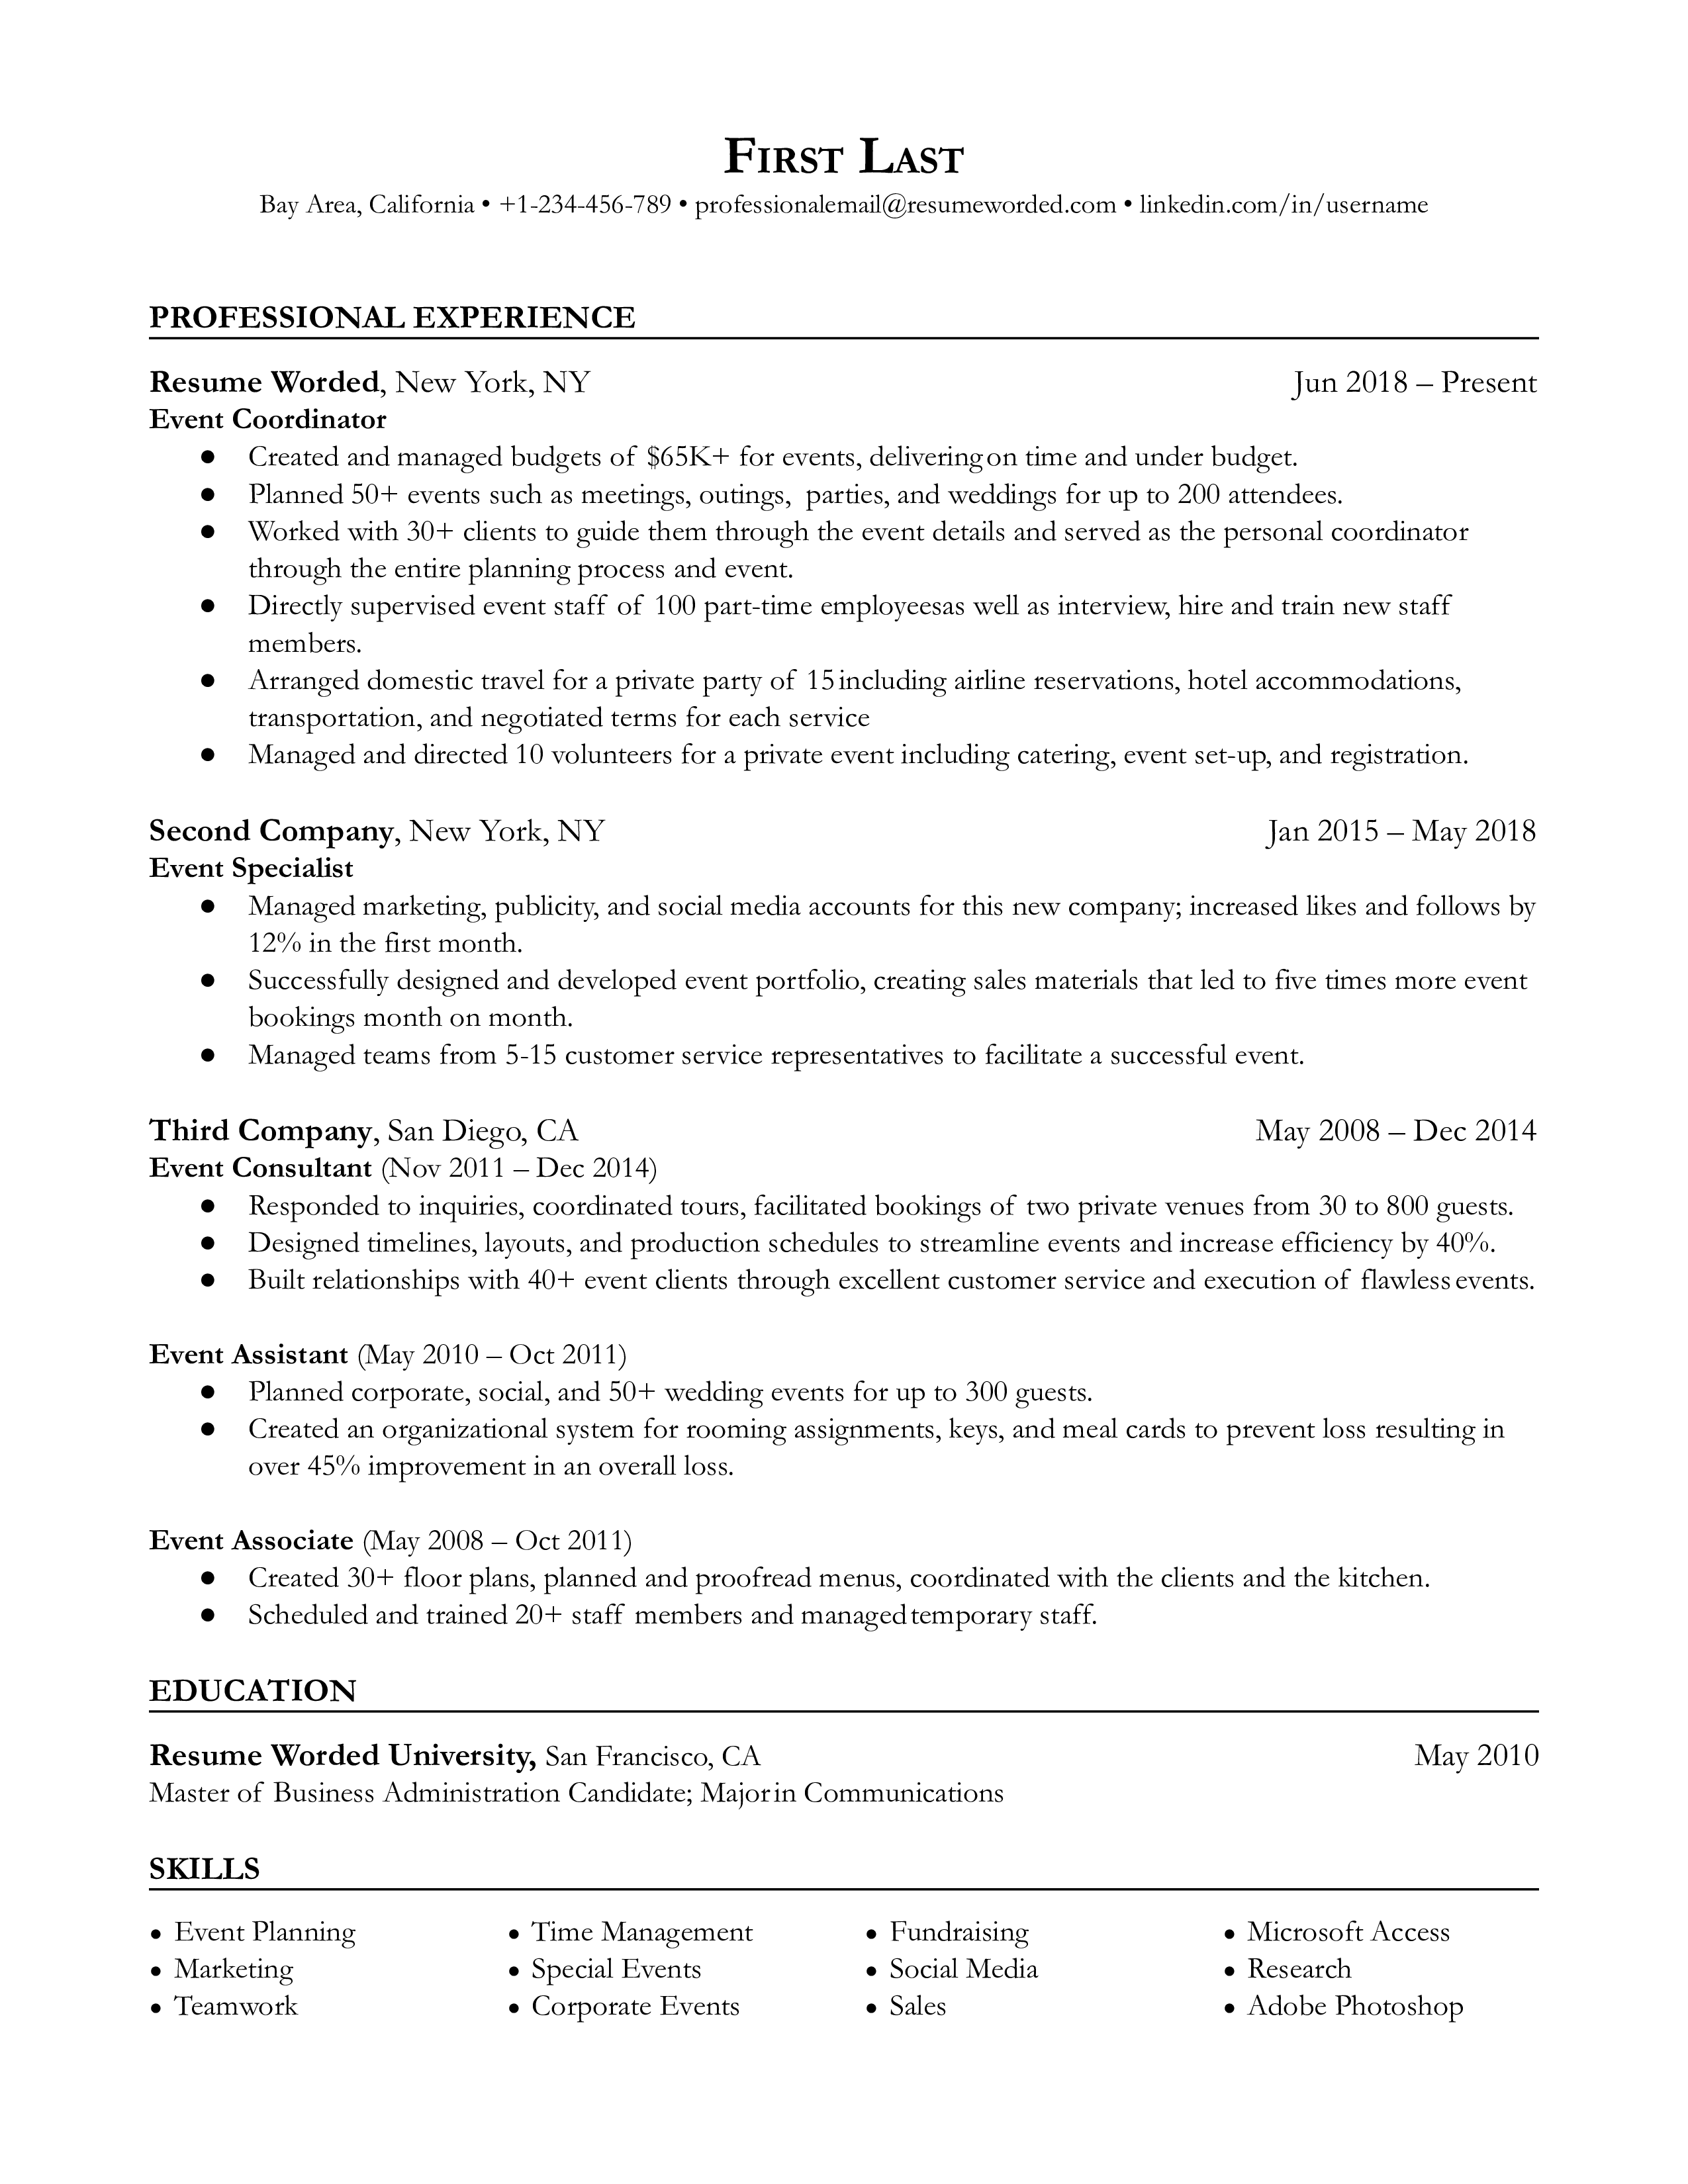 A CV showcasing an event coordinator's expertise in managing hybrid events and utilizing event technologies.